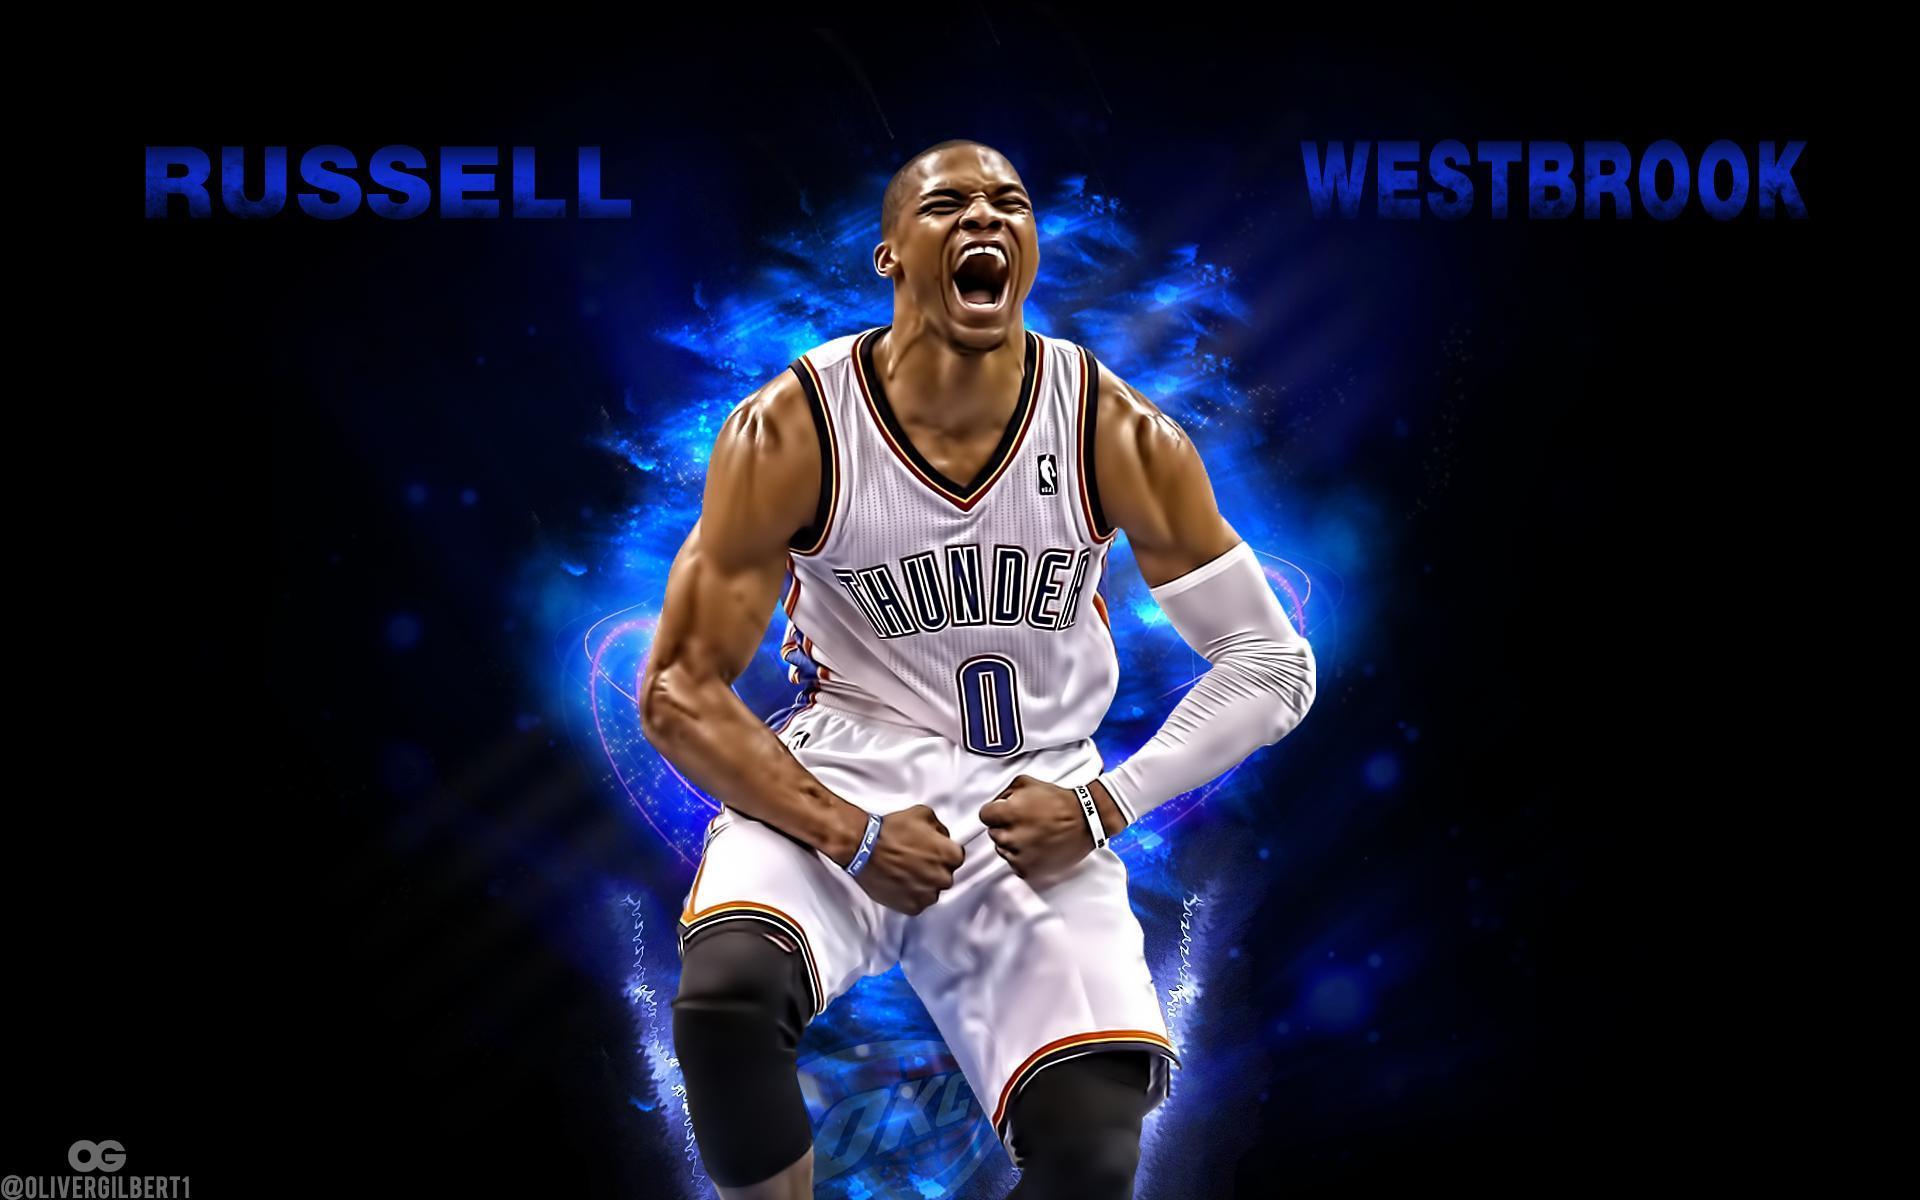 Don&;t Blink As Westbrook Is the Man to Beat for MVP Sports